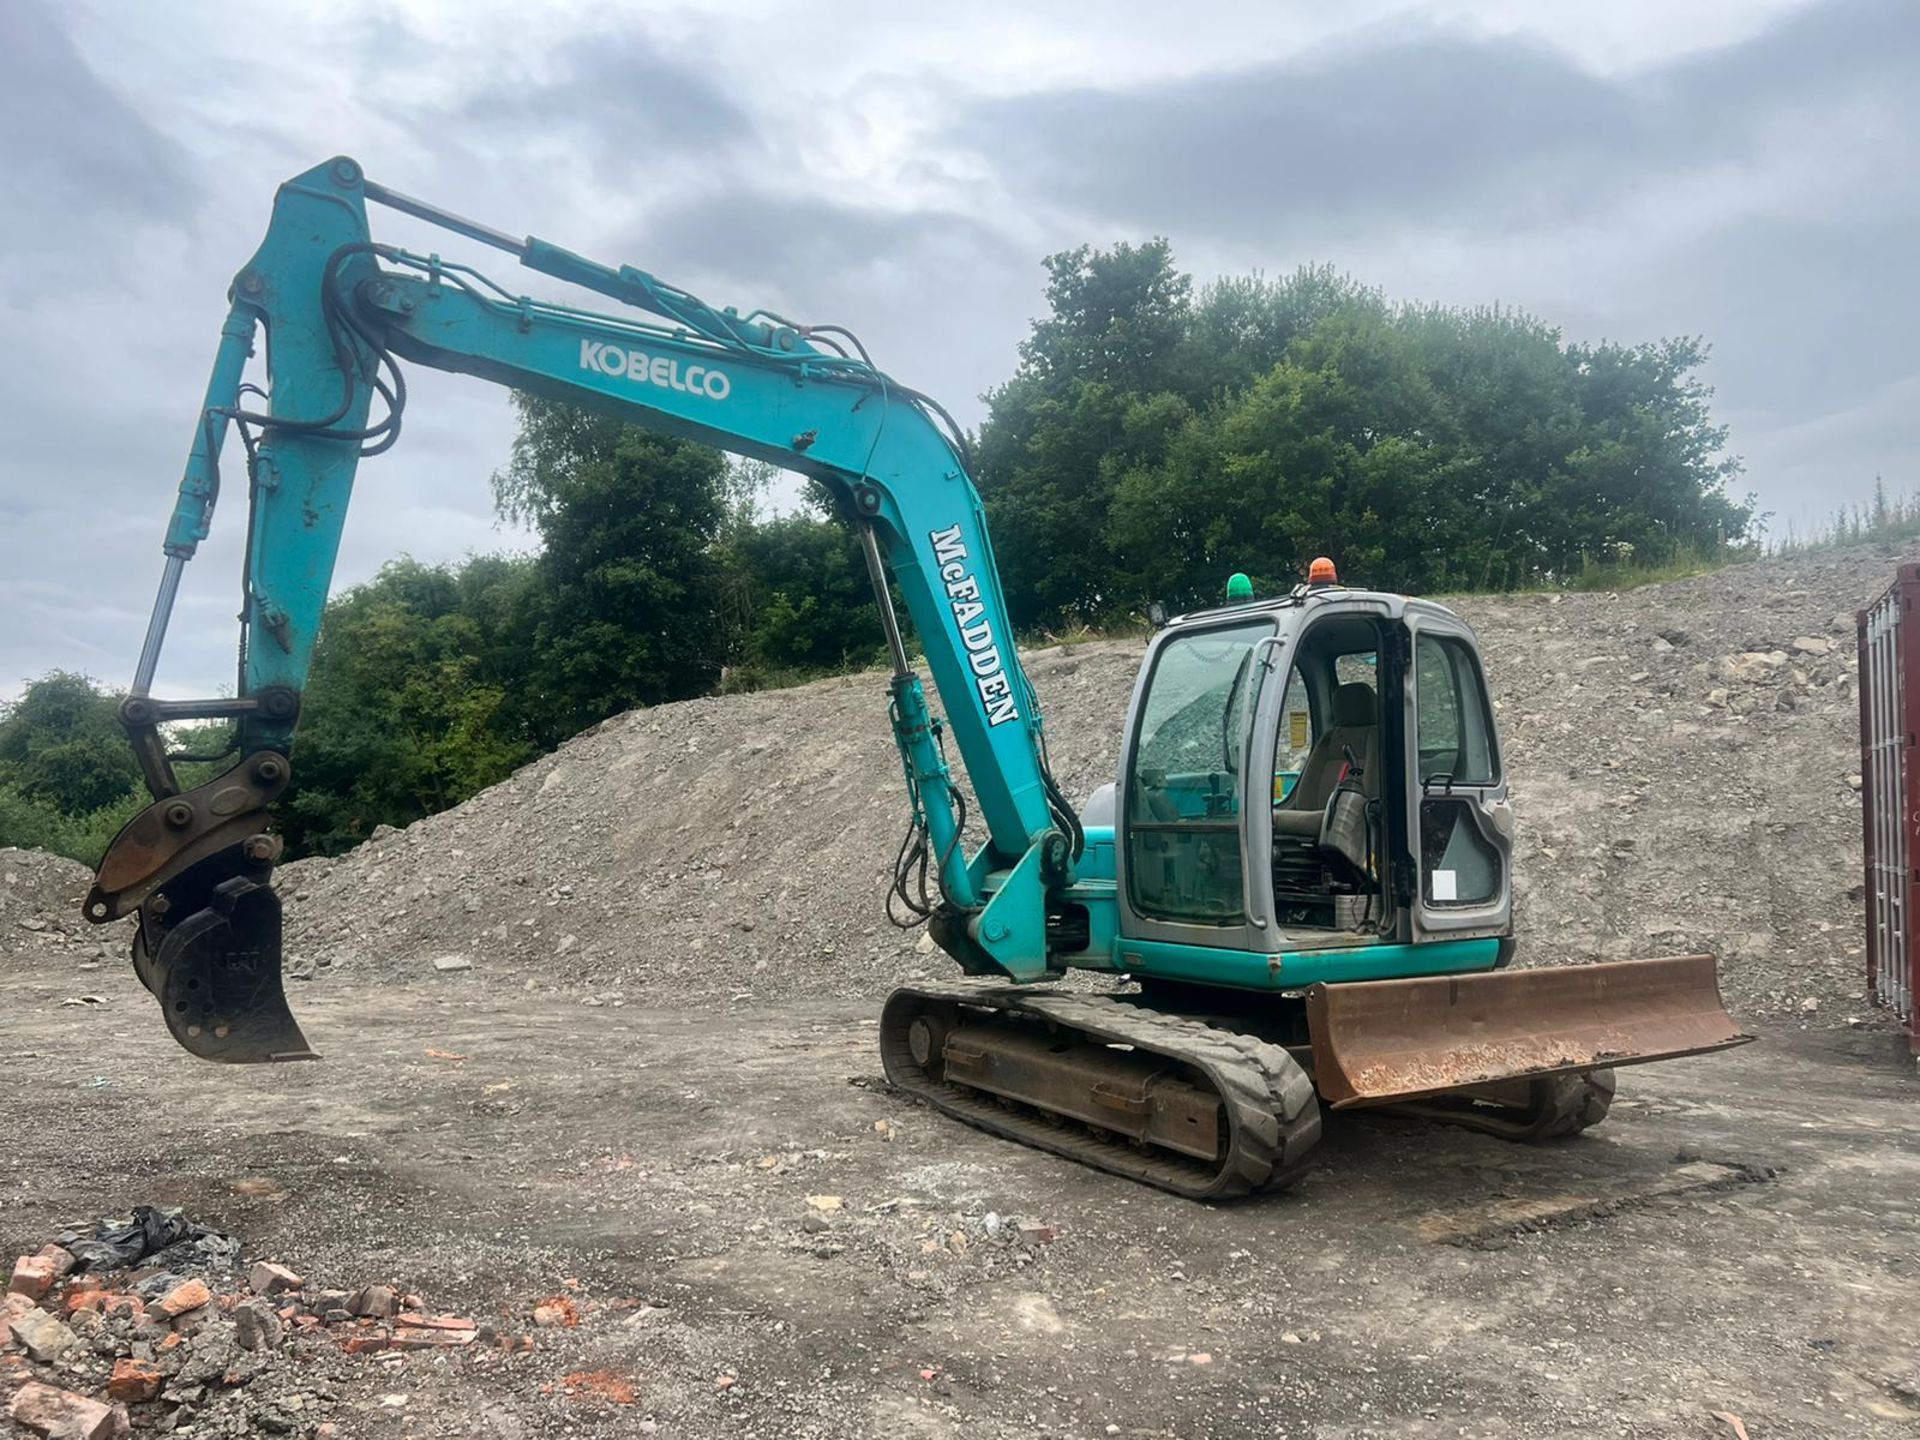 Kobelco 80MSR 8 Tonne Excavator With Blade, Runs Drives And Digs,Showing A Low 9117 Hours!*PLUS VAT* - Image 3 of 29